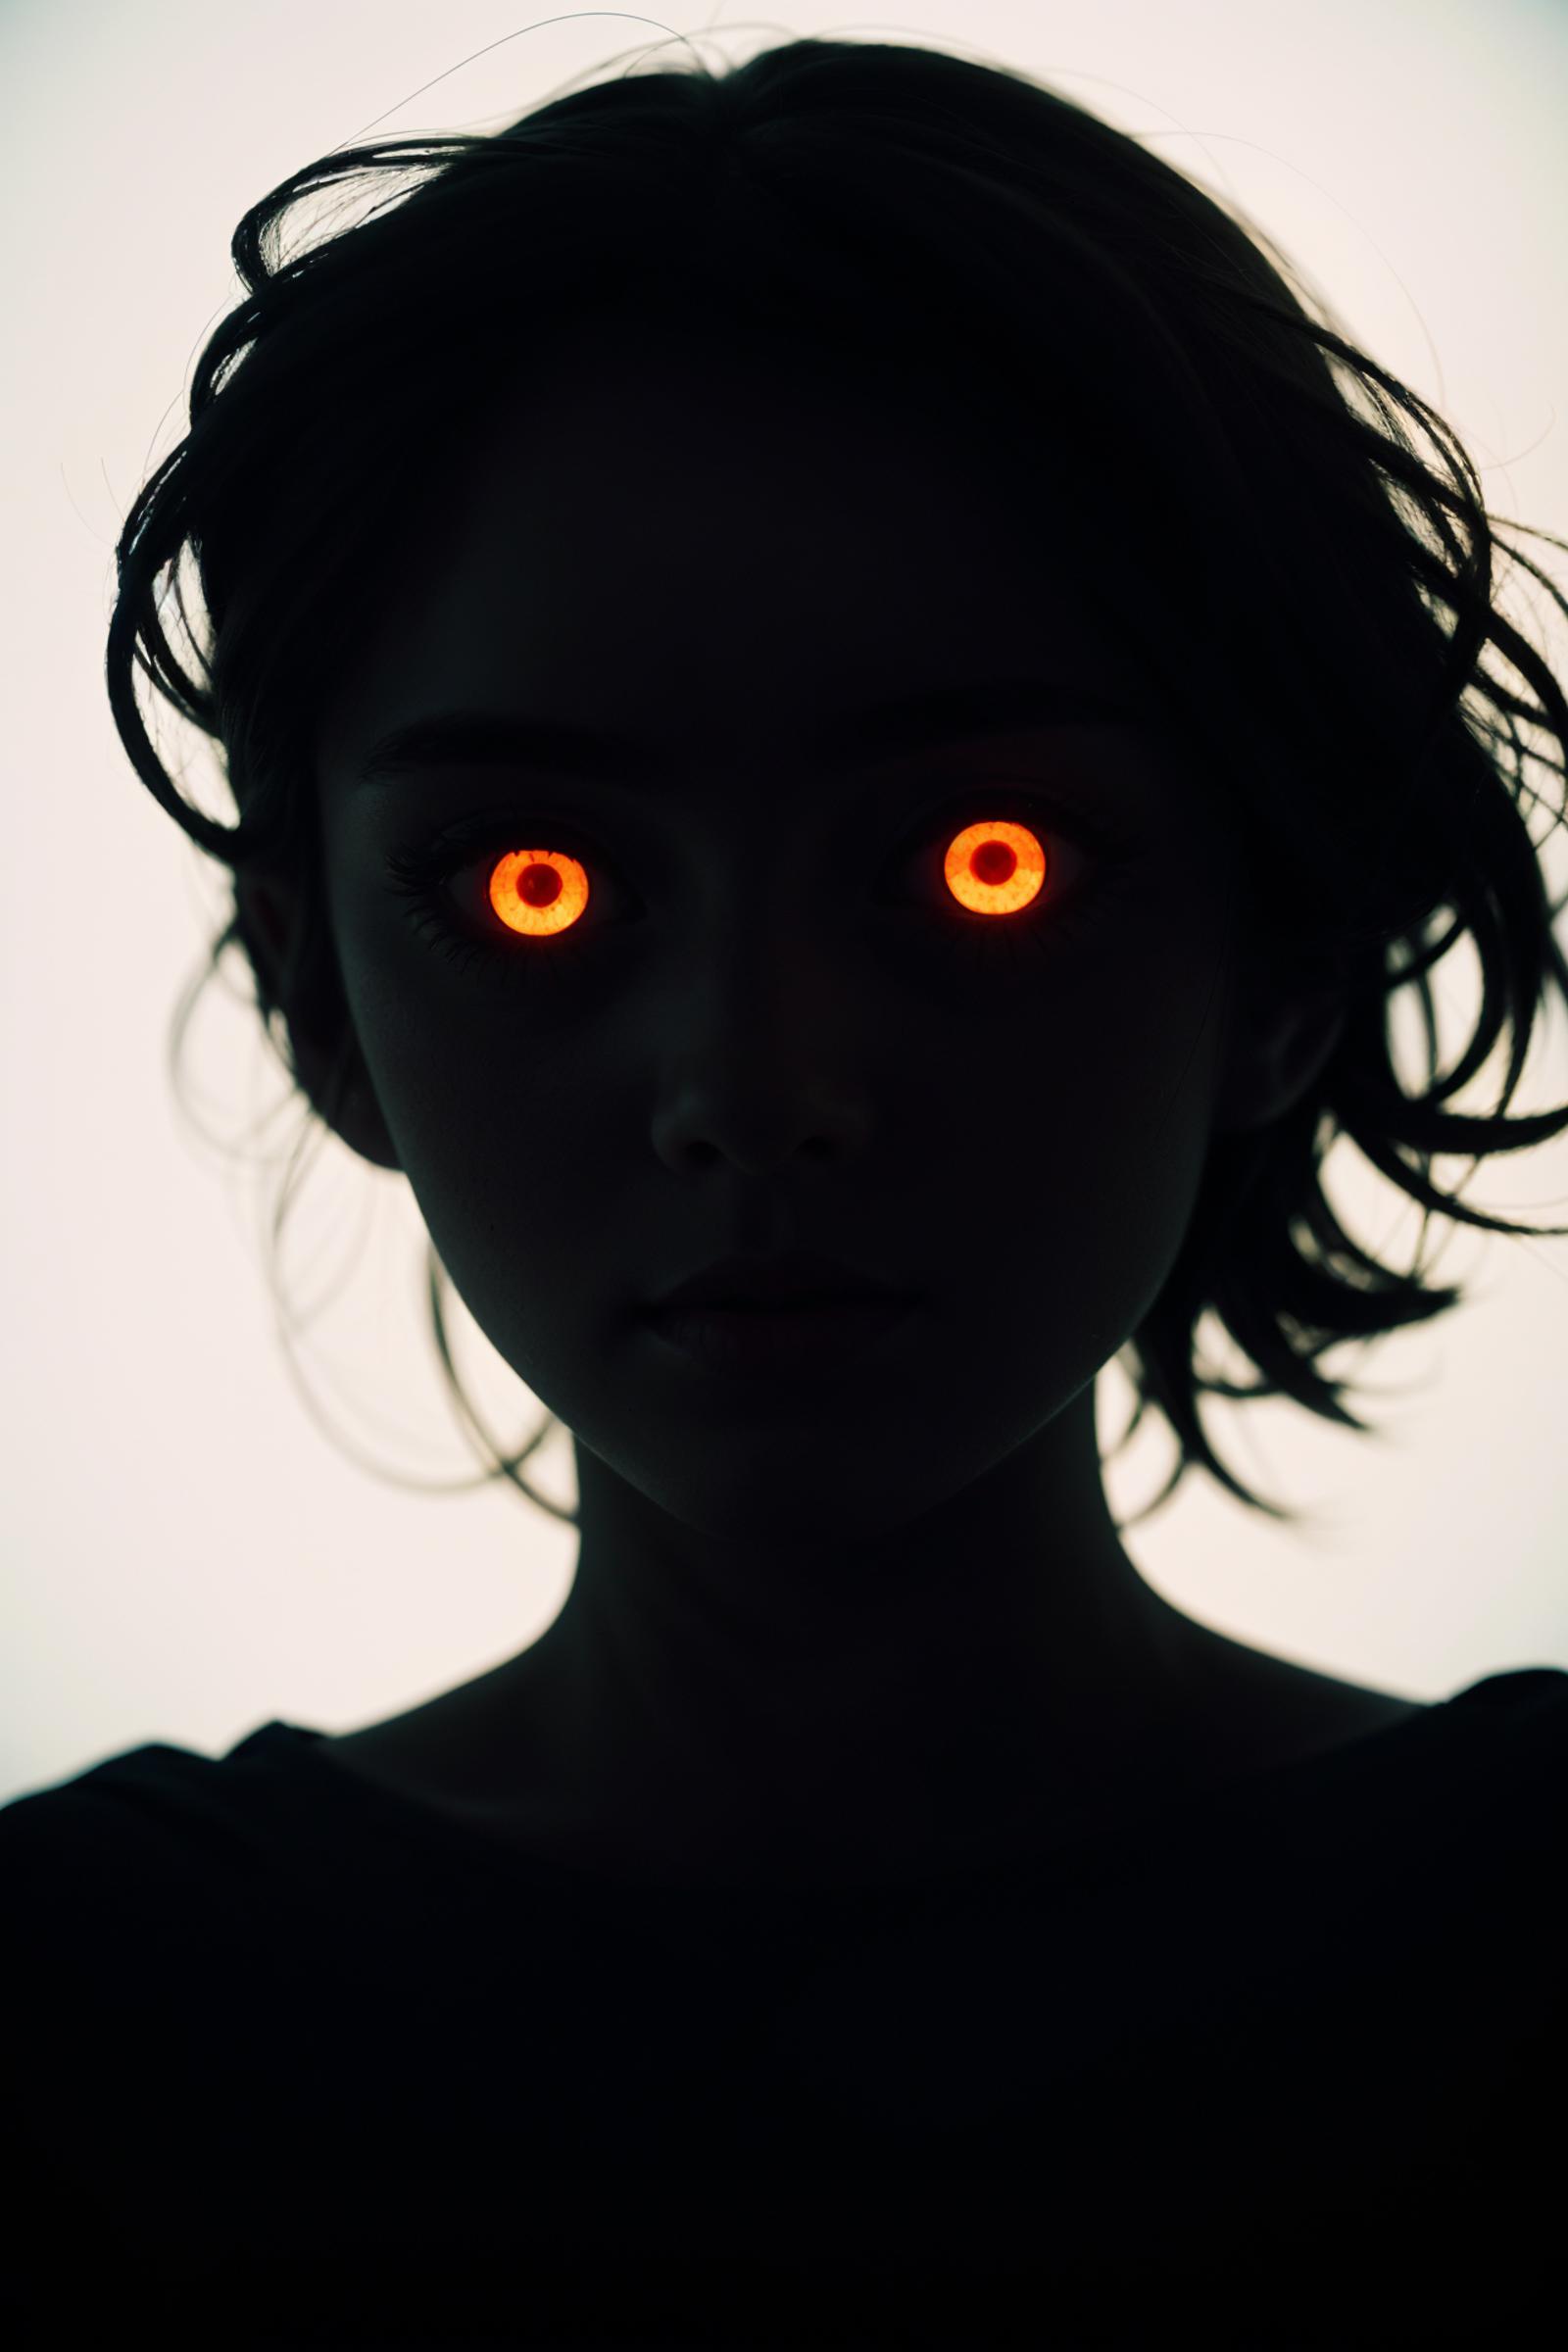 The eerie face of a girl with glowing orange eyes.